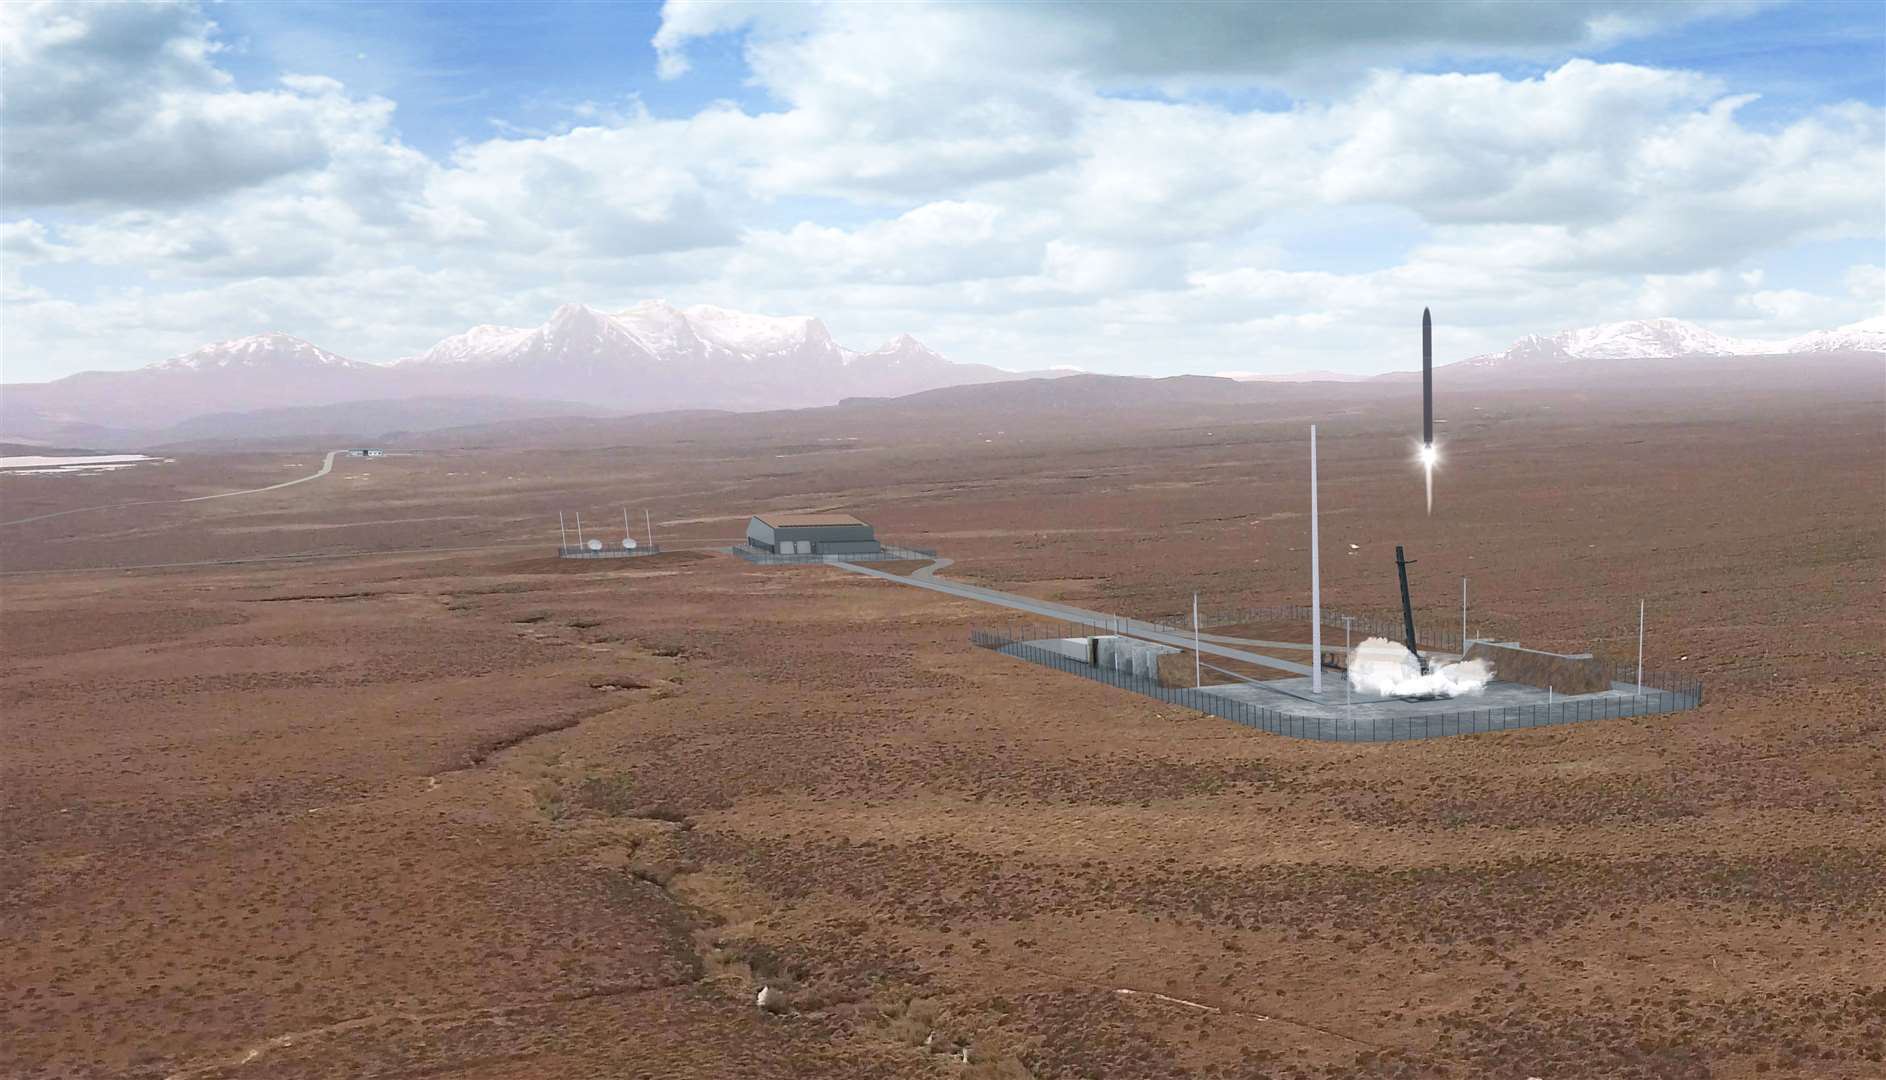 Artists impression of Orbex Prime launch from Sutherland Spaceport.